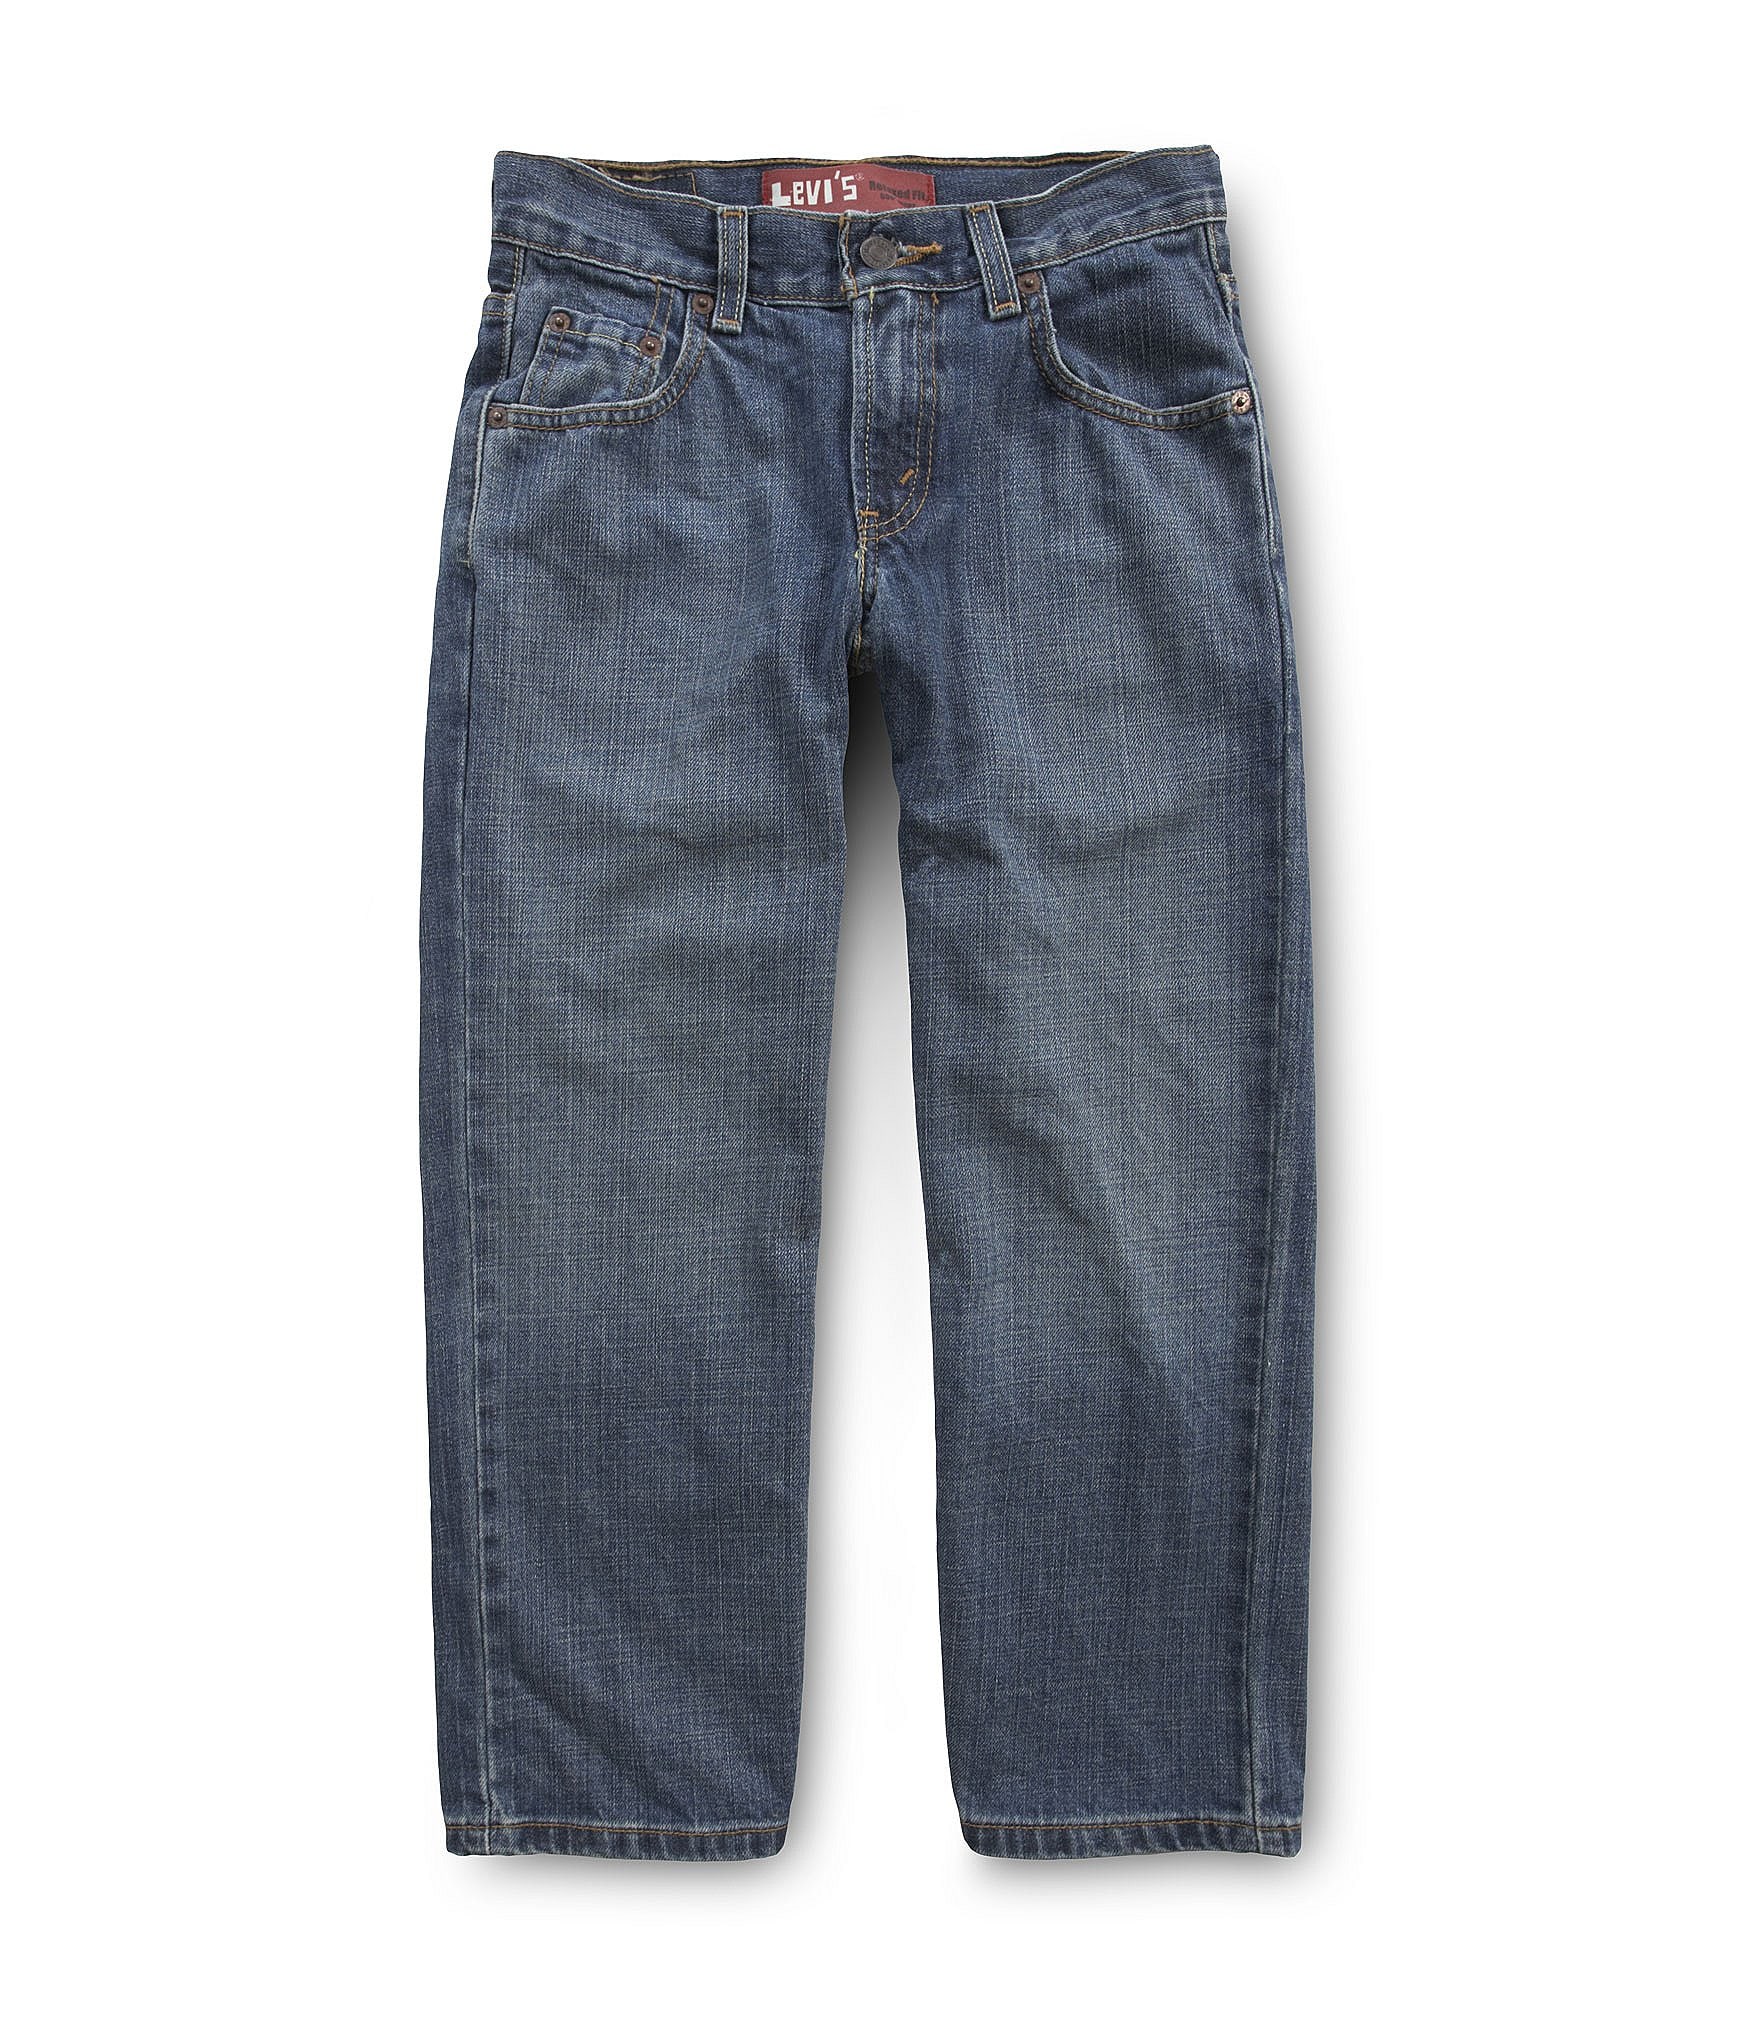 levi's relaxed jeans